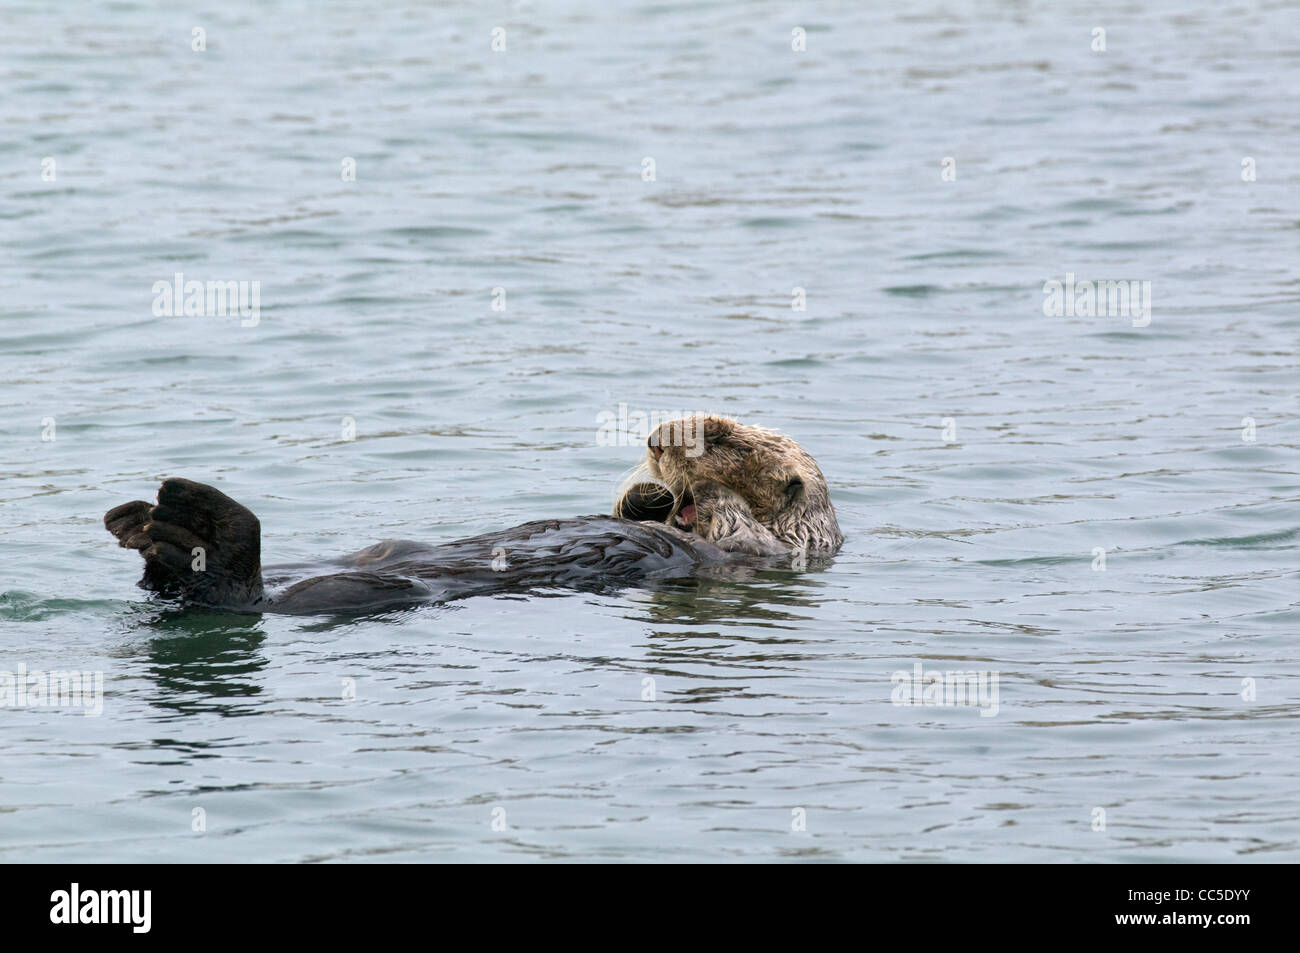 A California Sea Otter (Enhydra lutris nereis) floating on its back in Elkhorn Slough, Monterey County, California. Stock Photo